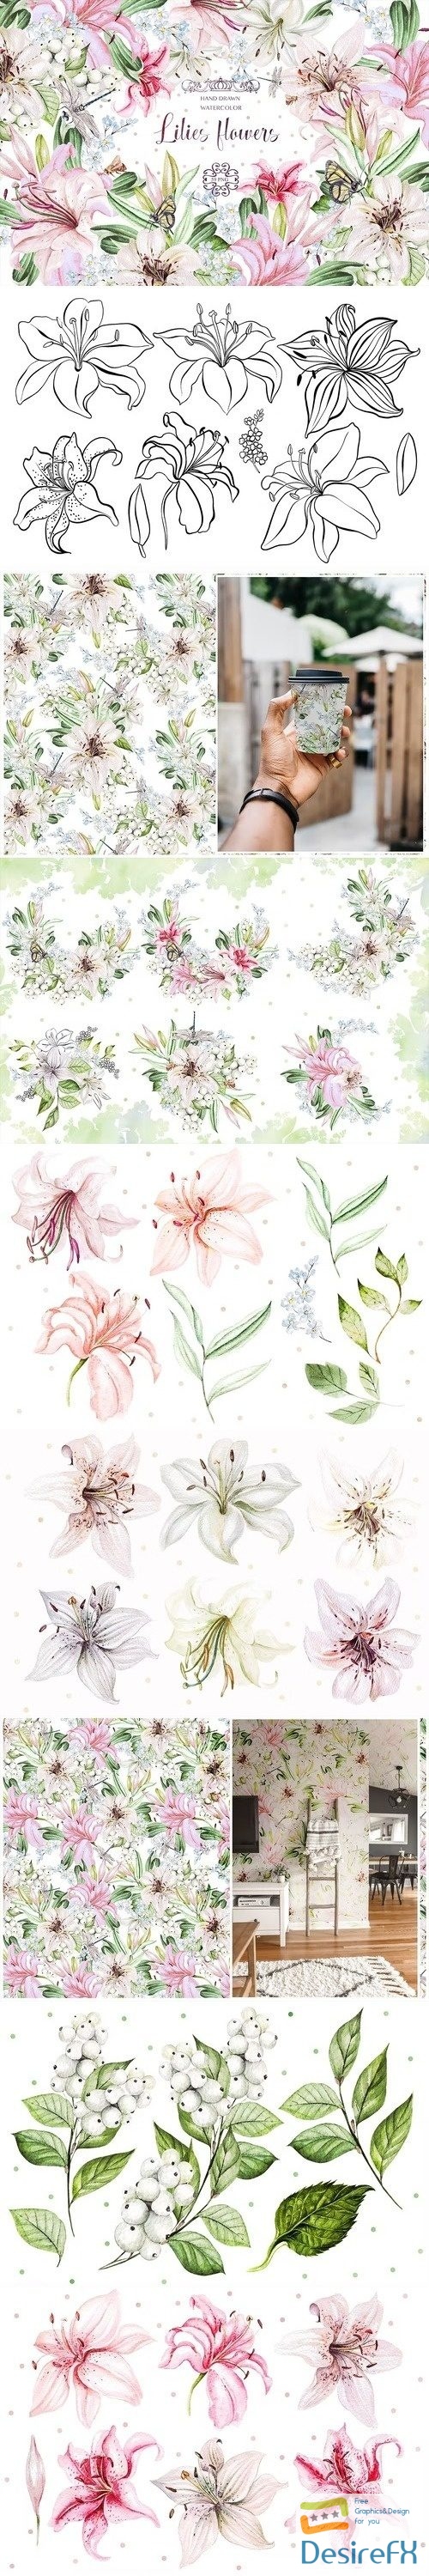 Hand Drawn watercolor flowers lily 2